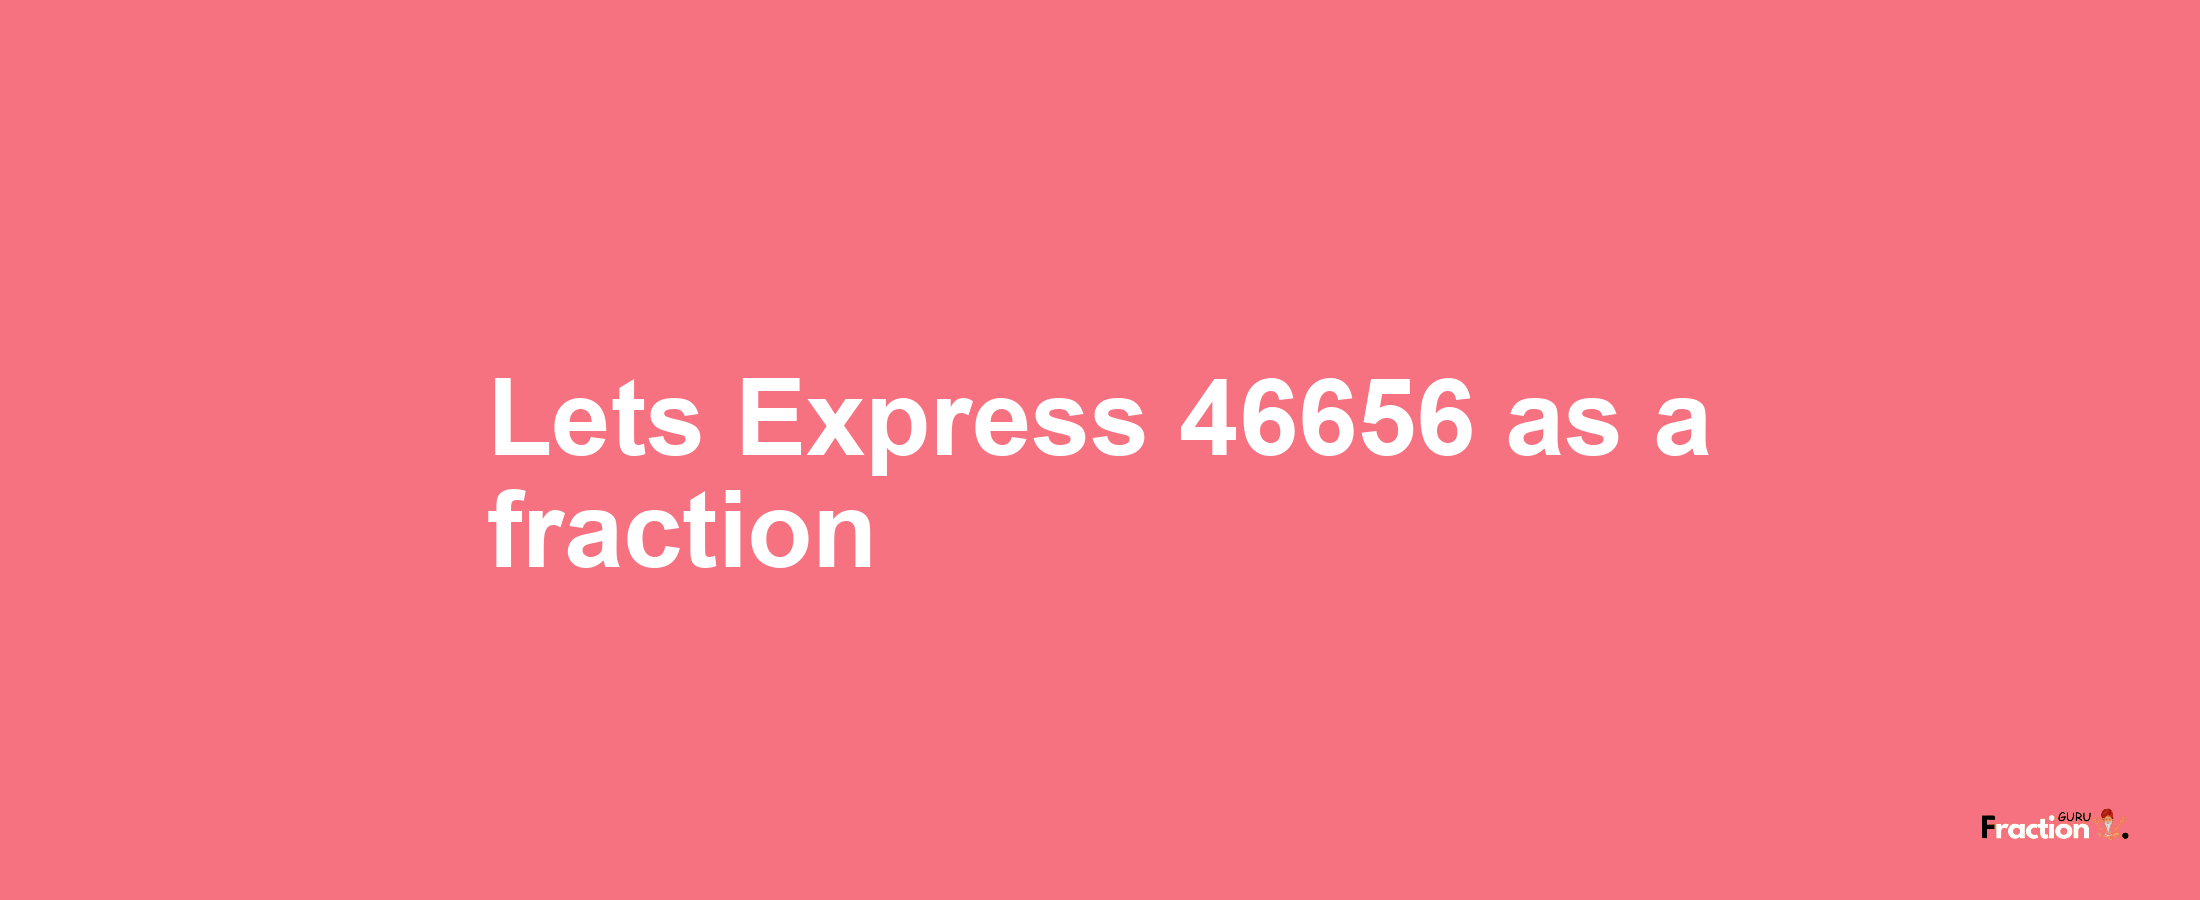 Lets Express 46656 as afraction